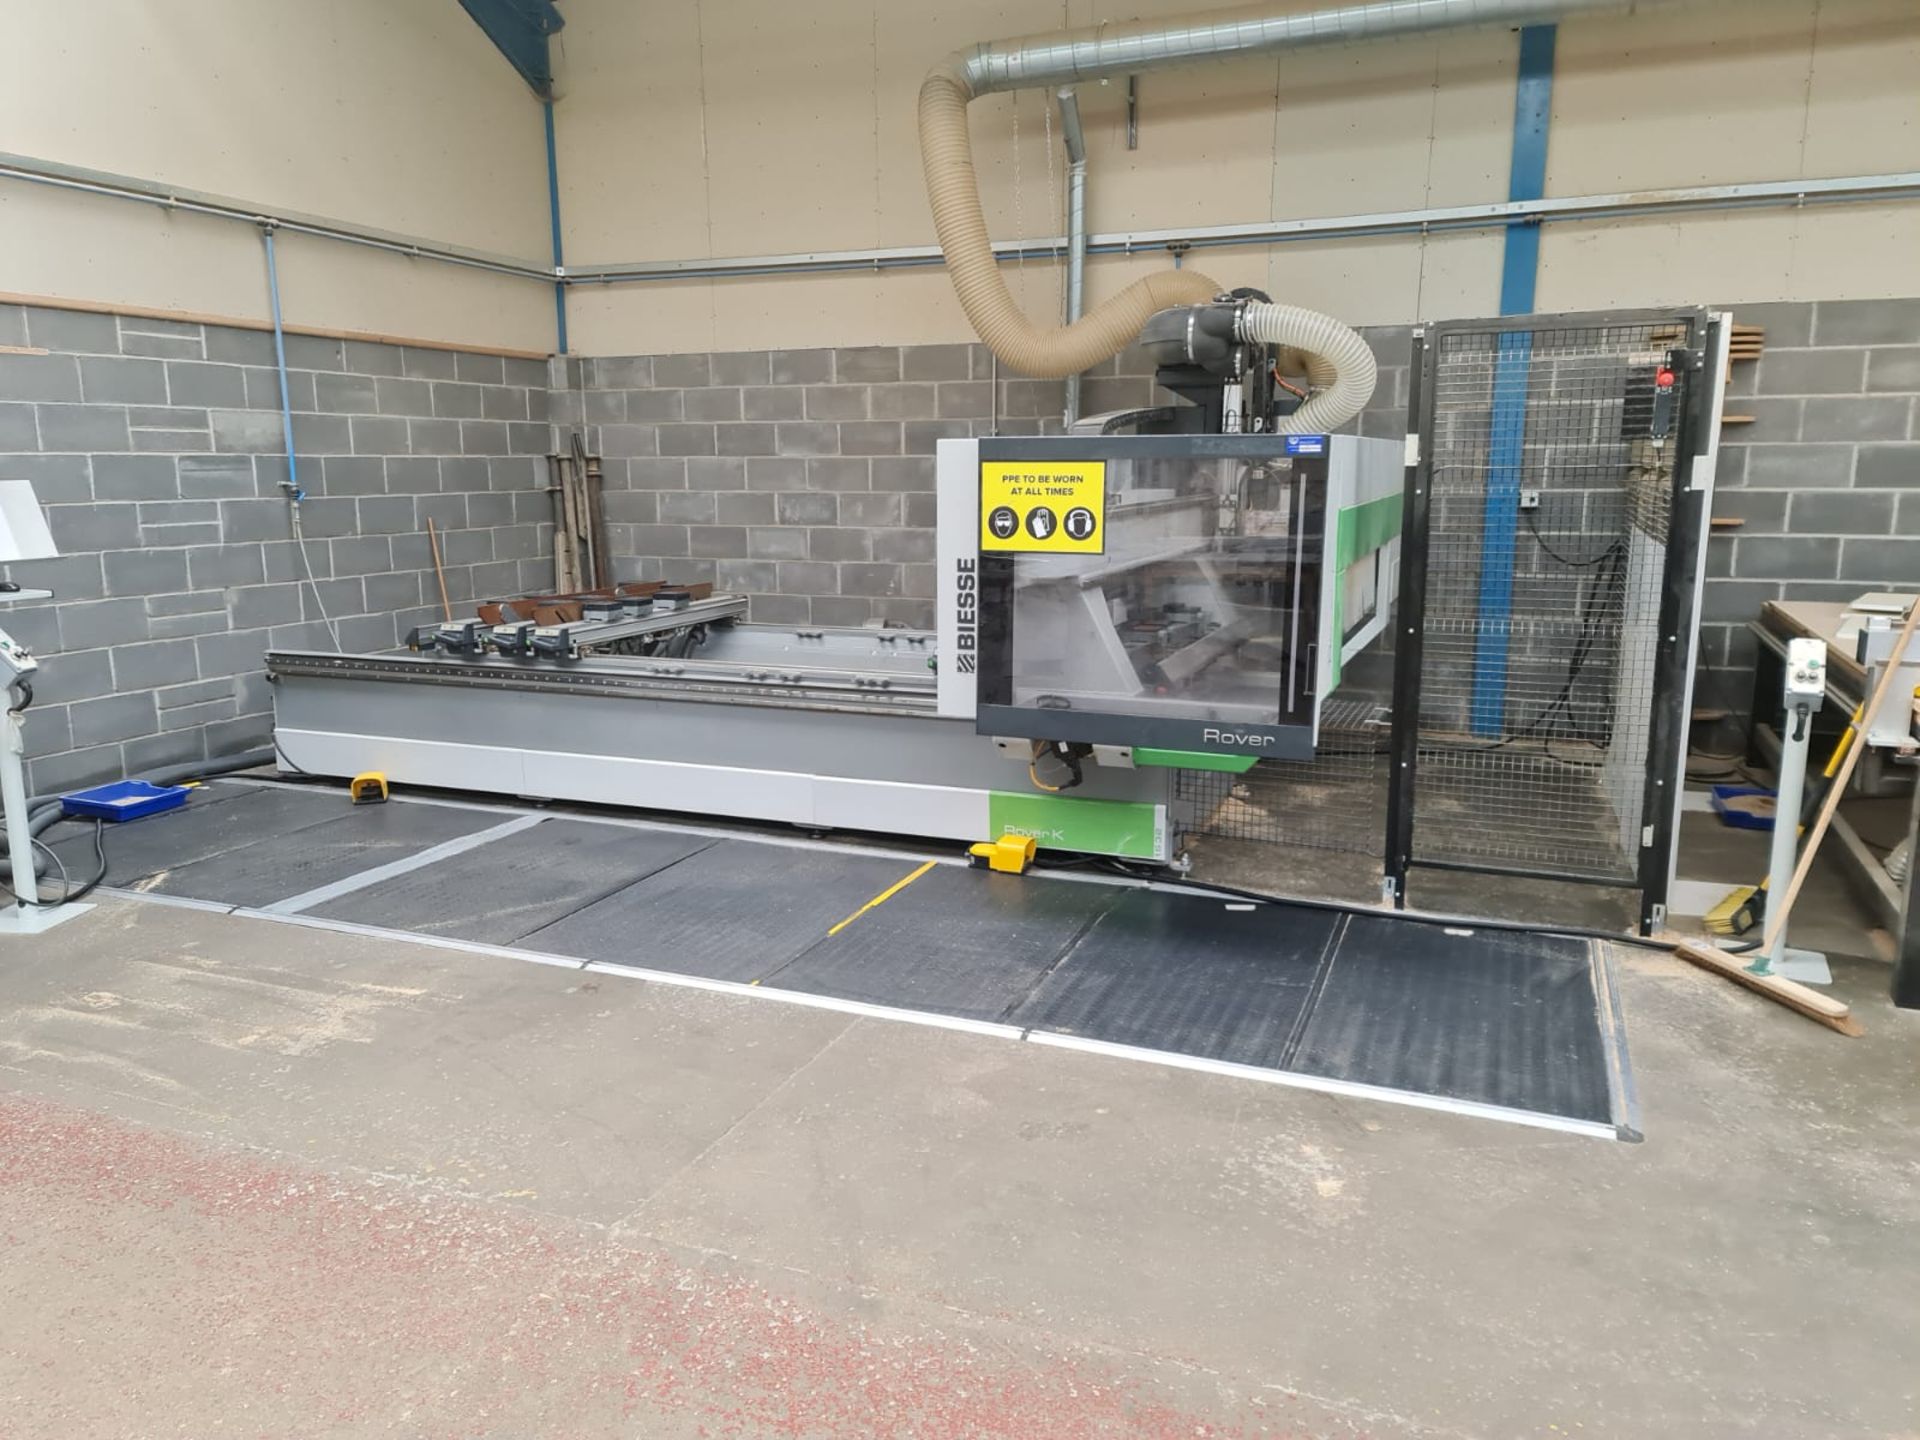 Biesse Rover K 1532 G CNC Router, Serial Number 10